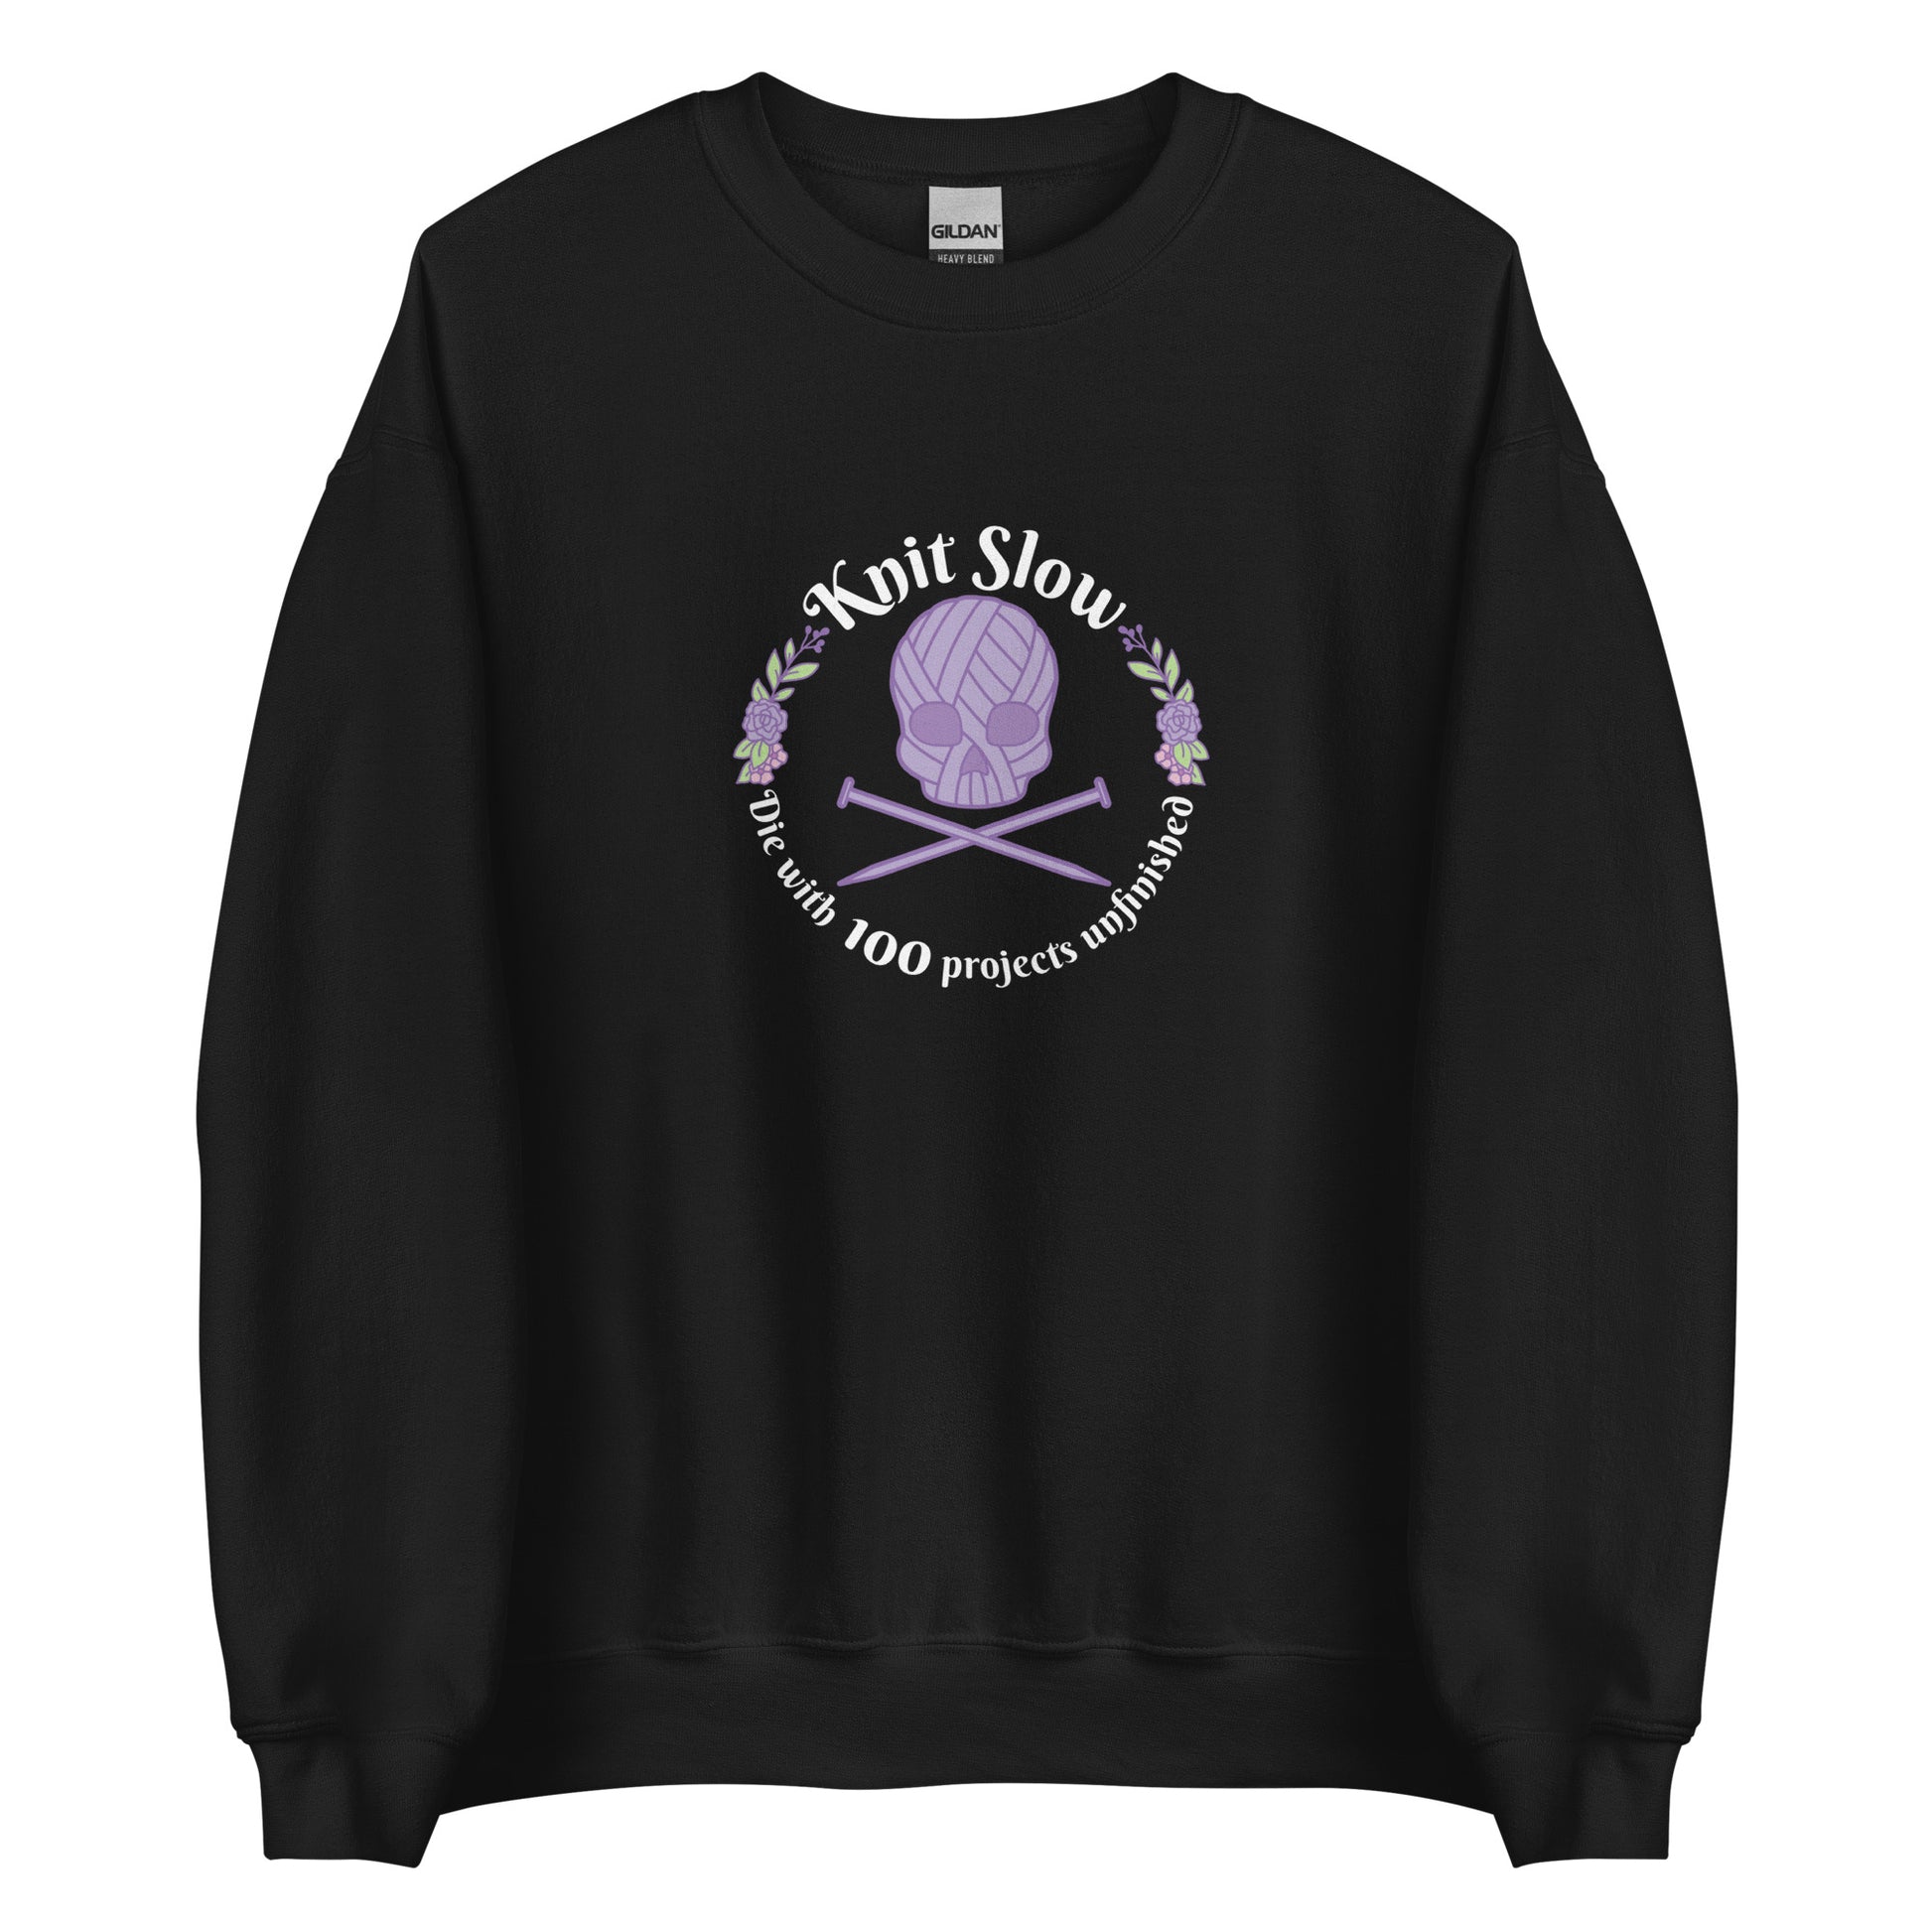 A black crewneck sweatshirt featuring an image of a skull and crossbones made of yarn and knitting needles. A floral wreath surrounds the skull, along with words that read "Knit Slow, Die with 100 projects unfinished"